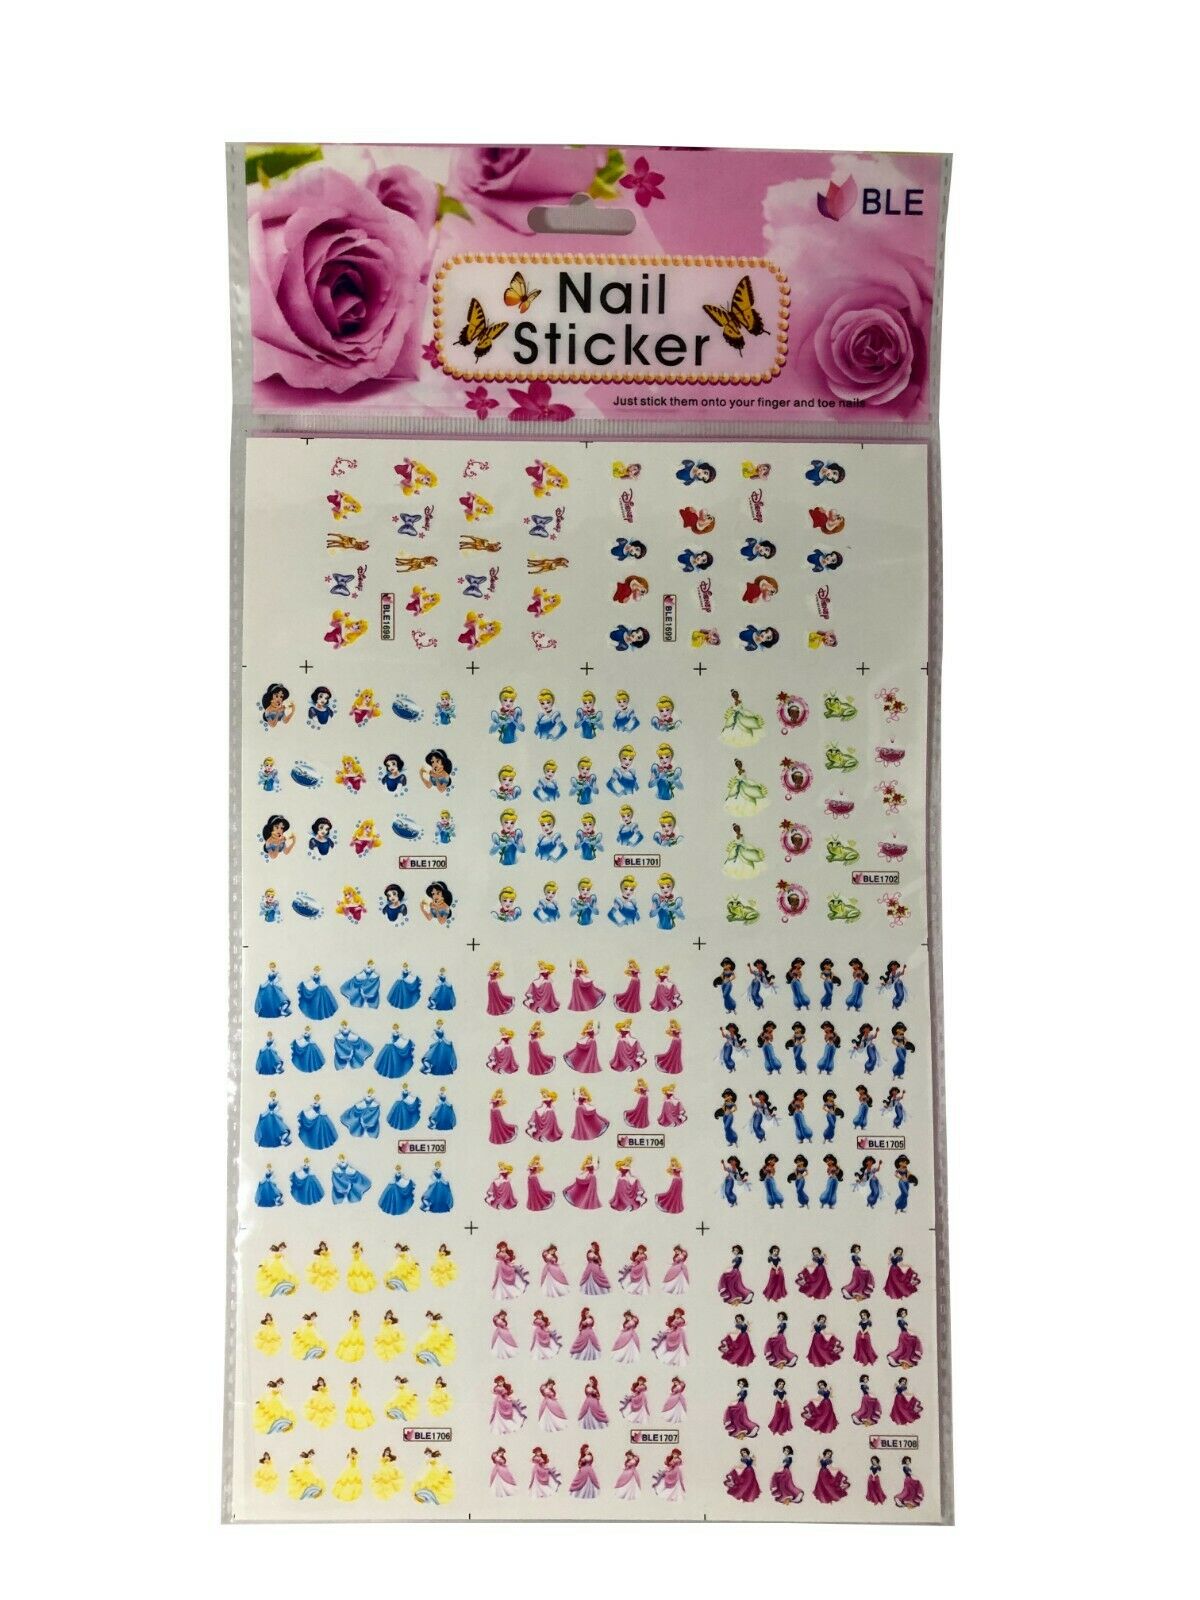 Princess Nail Art Stickers For Hands And Feet. Nail Art Decoration 100